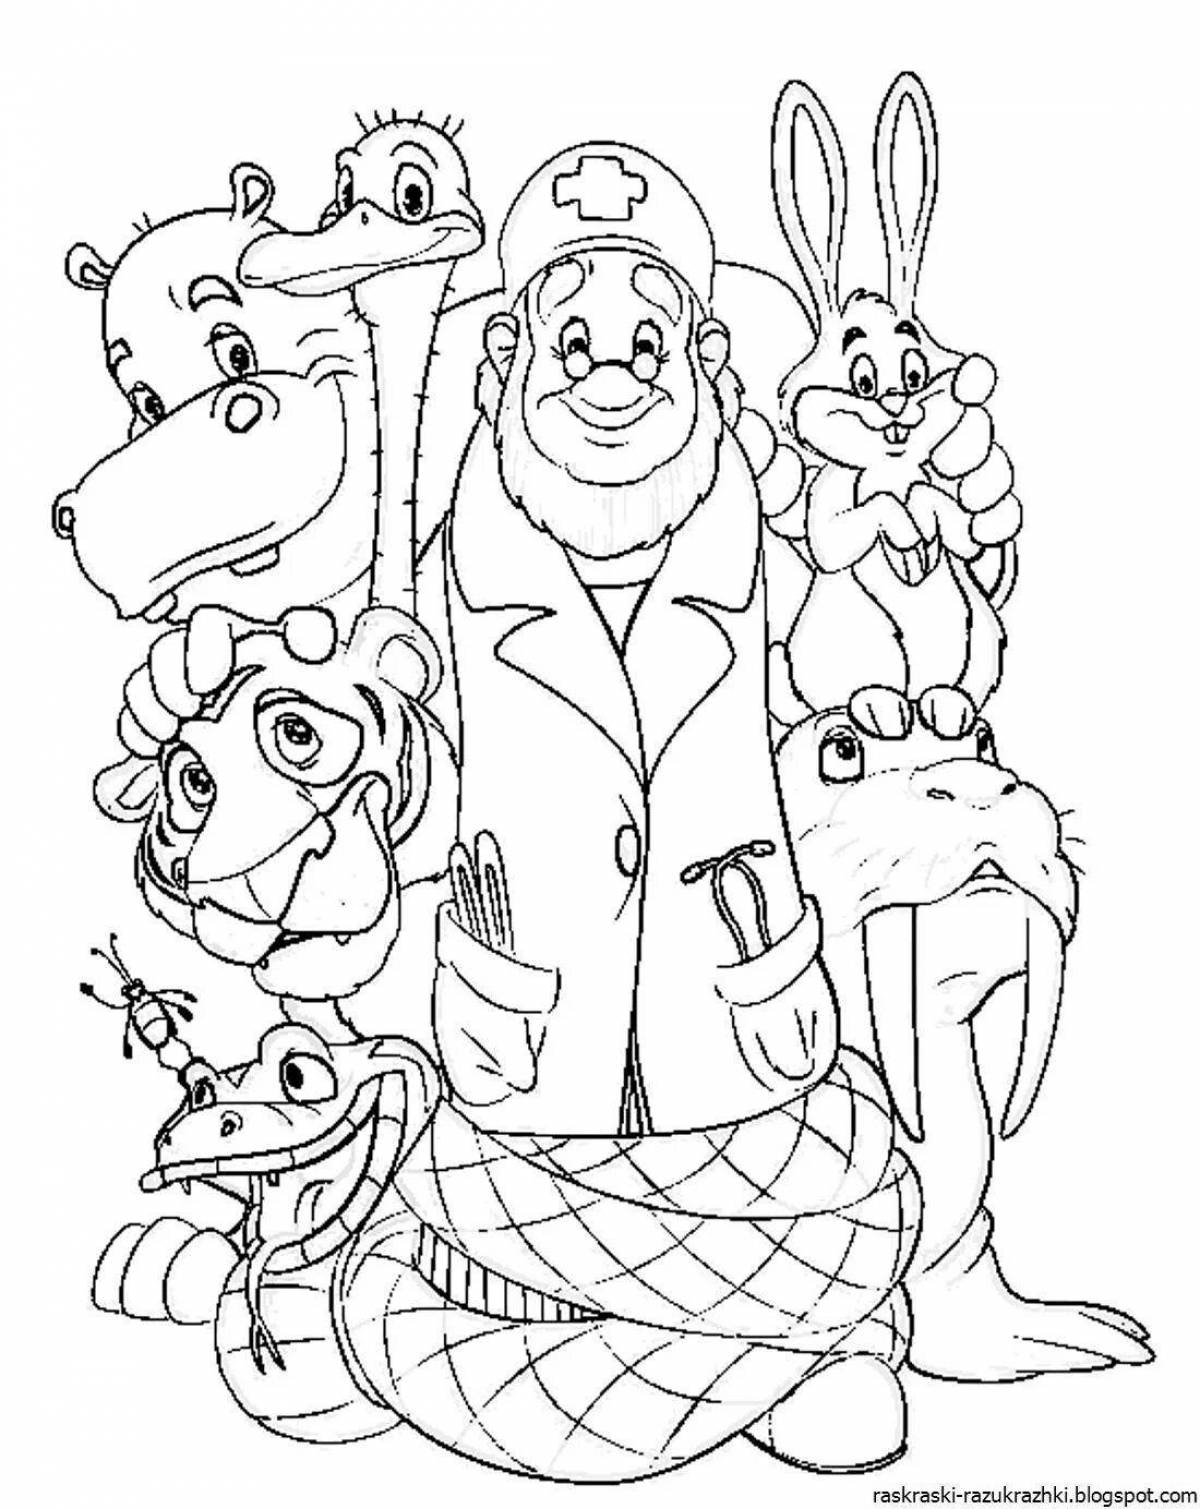 Fun coloring book heroes of Chukovsky's fairy tales